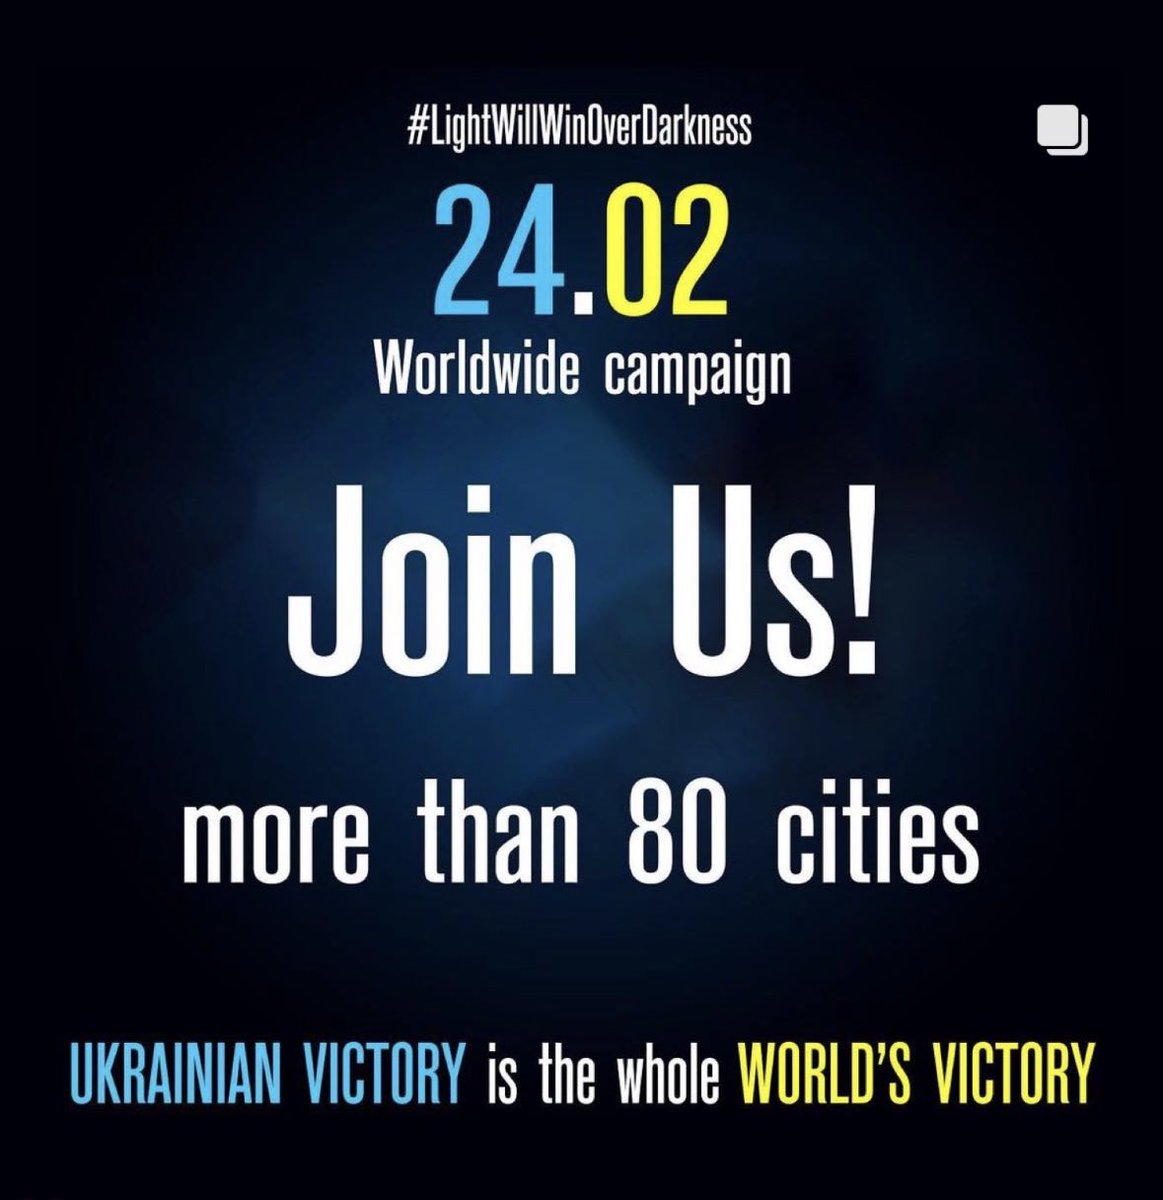 Find your city⬇️ and join us on 24.02.2023 to show your support for Ukraine 🇺🇦#StandWithUkraine #LightWillWinOverDarkness via @caukraine2022